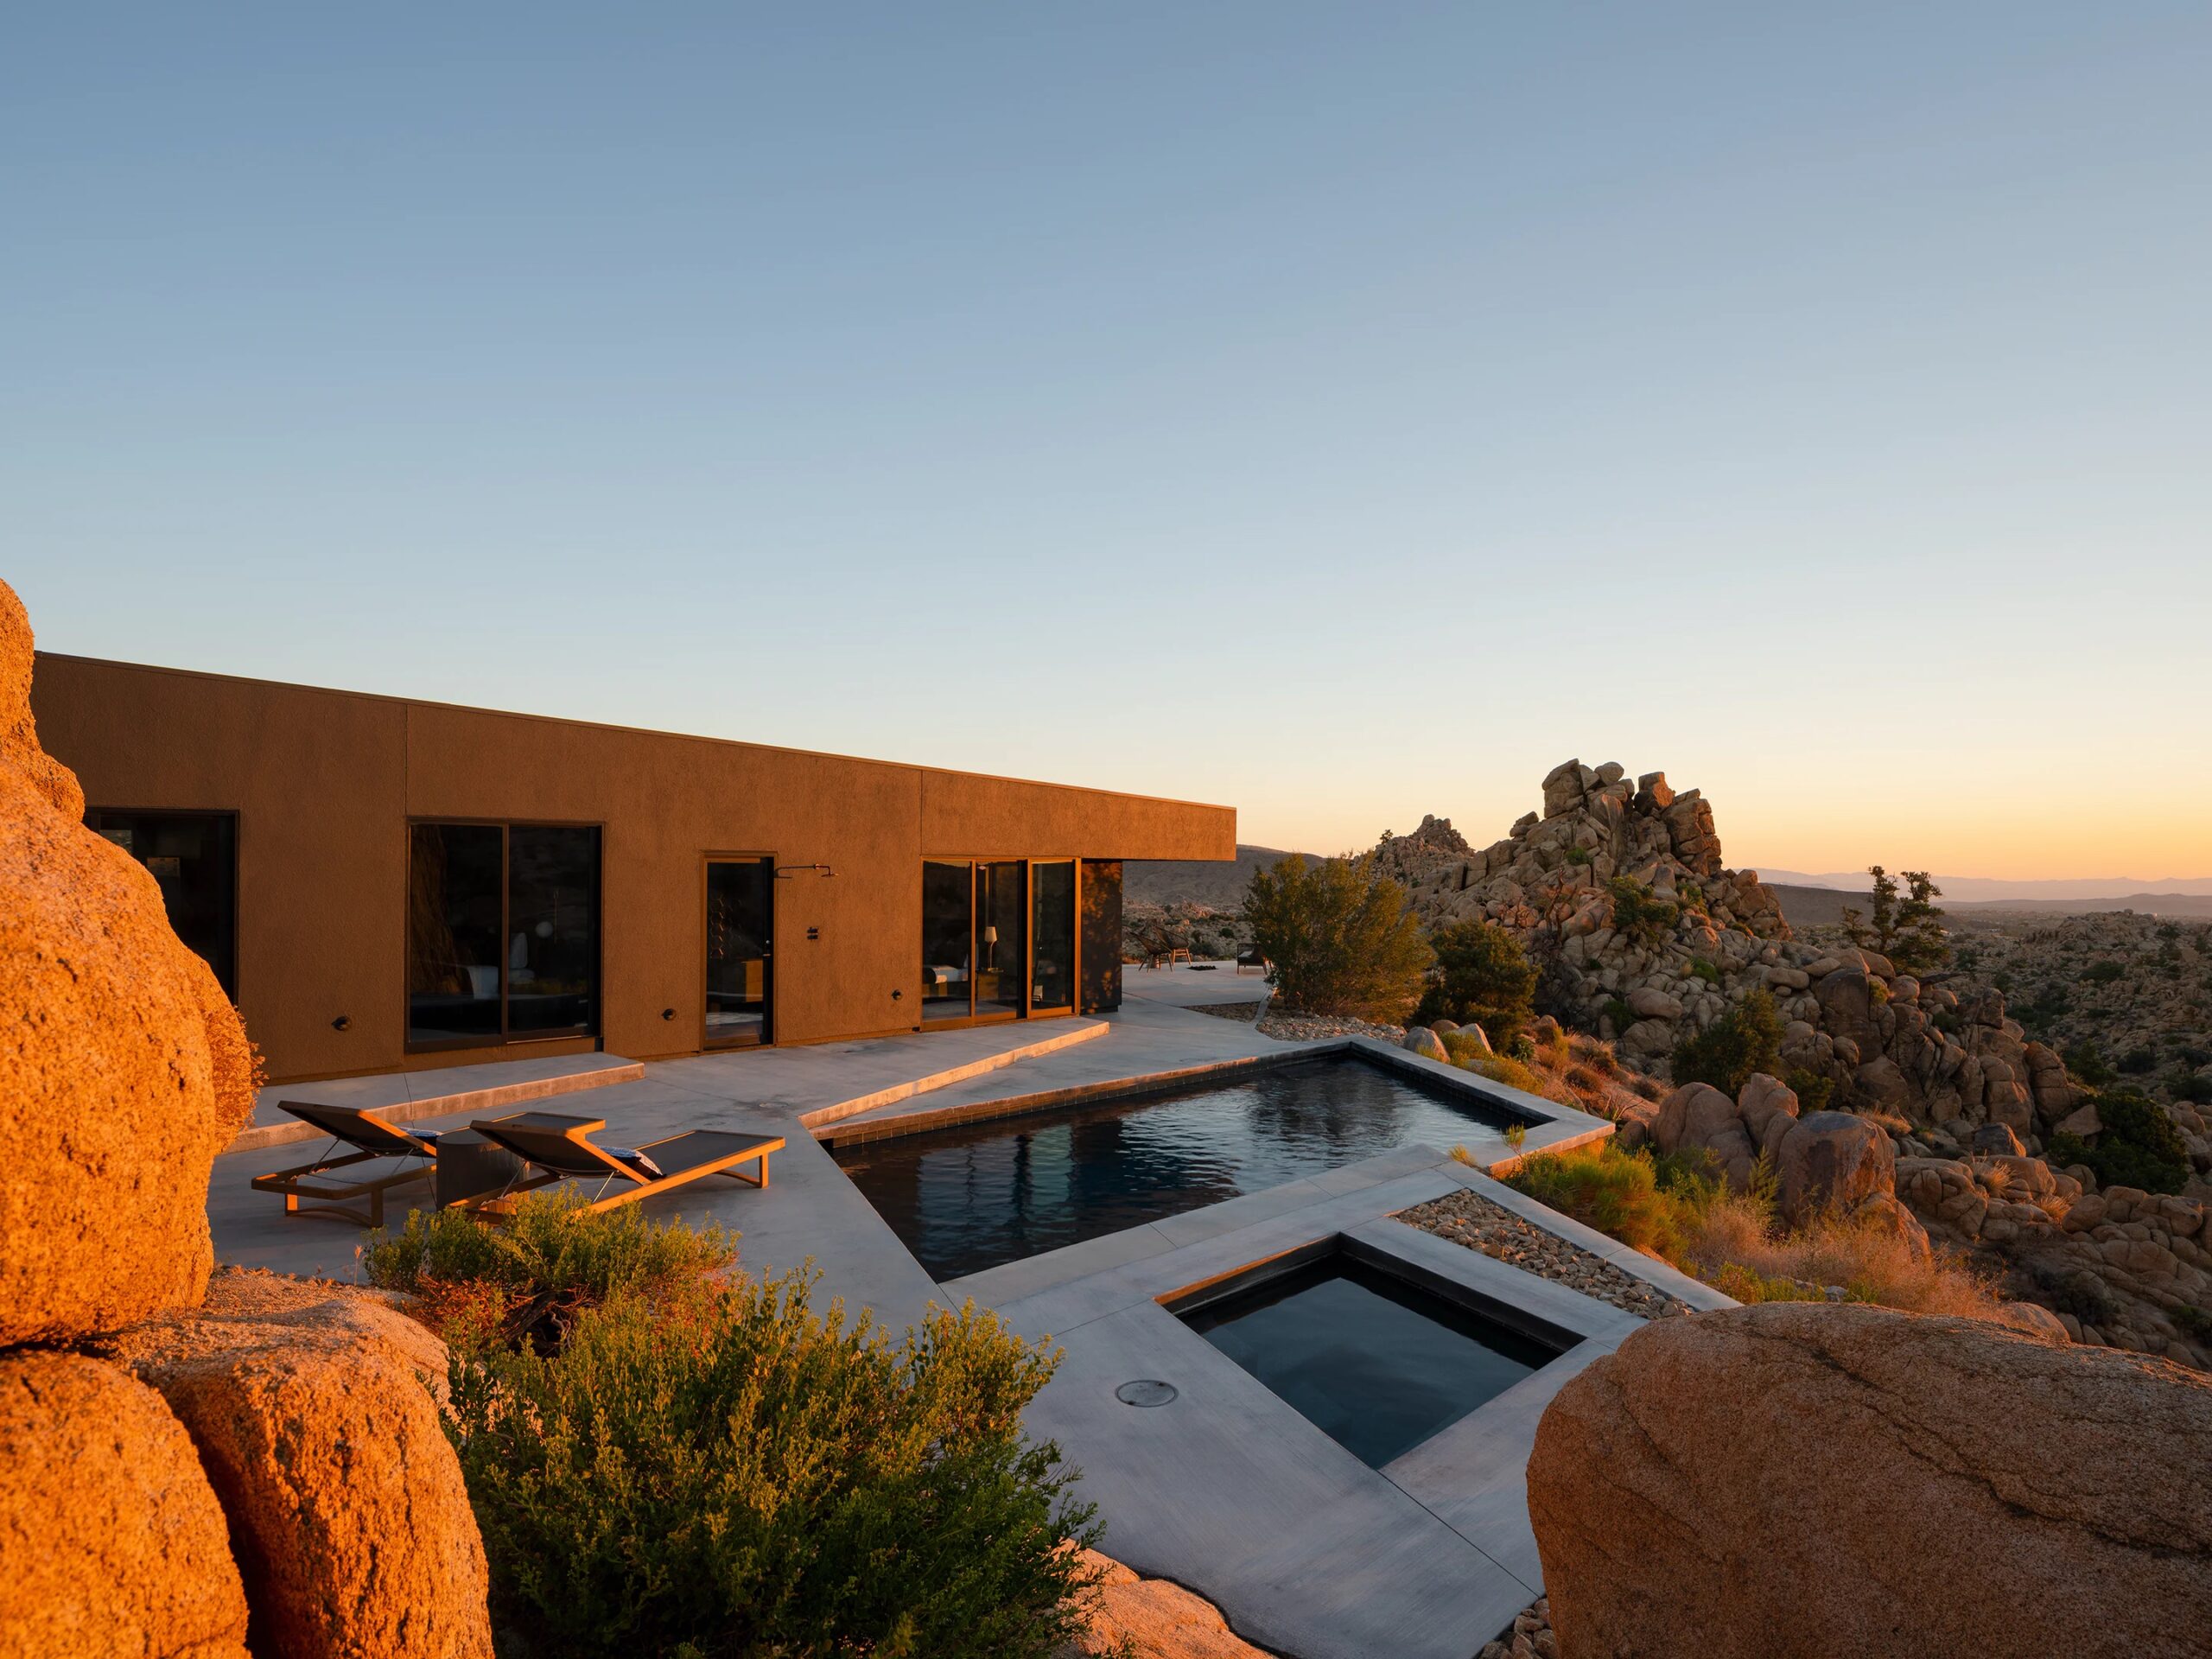 Pool and exterior of a vacation rental home near Joshua Tree National Park, California.